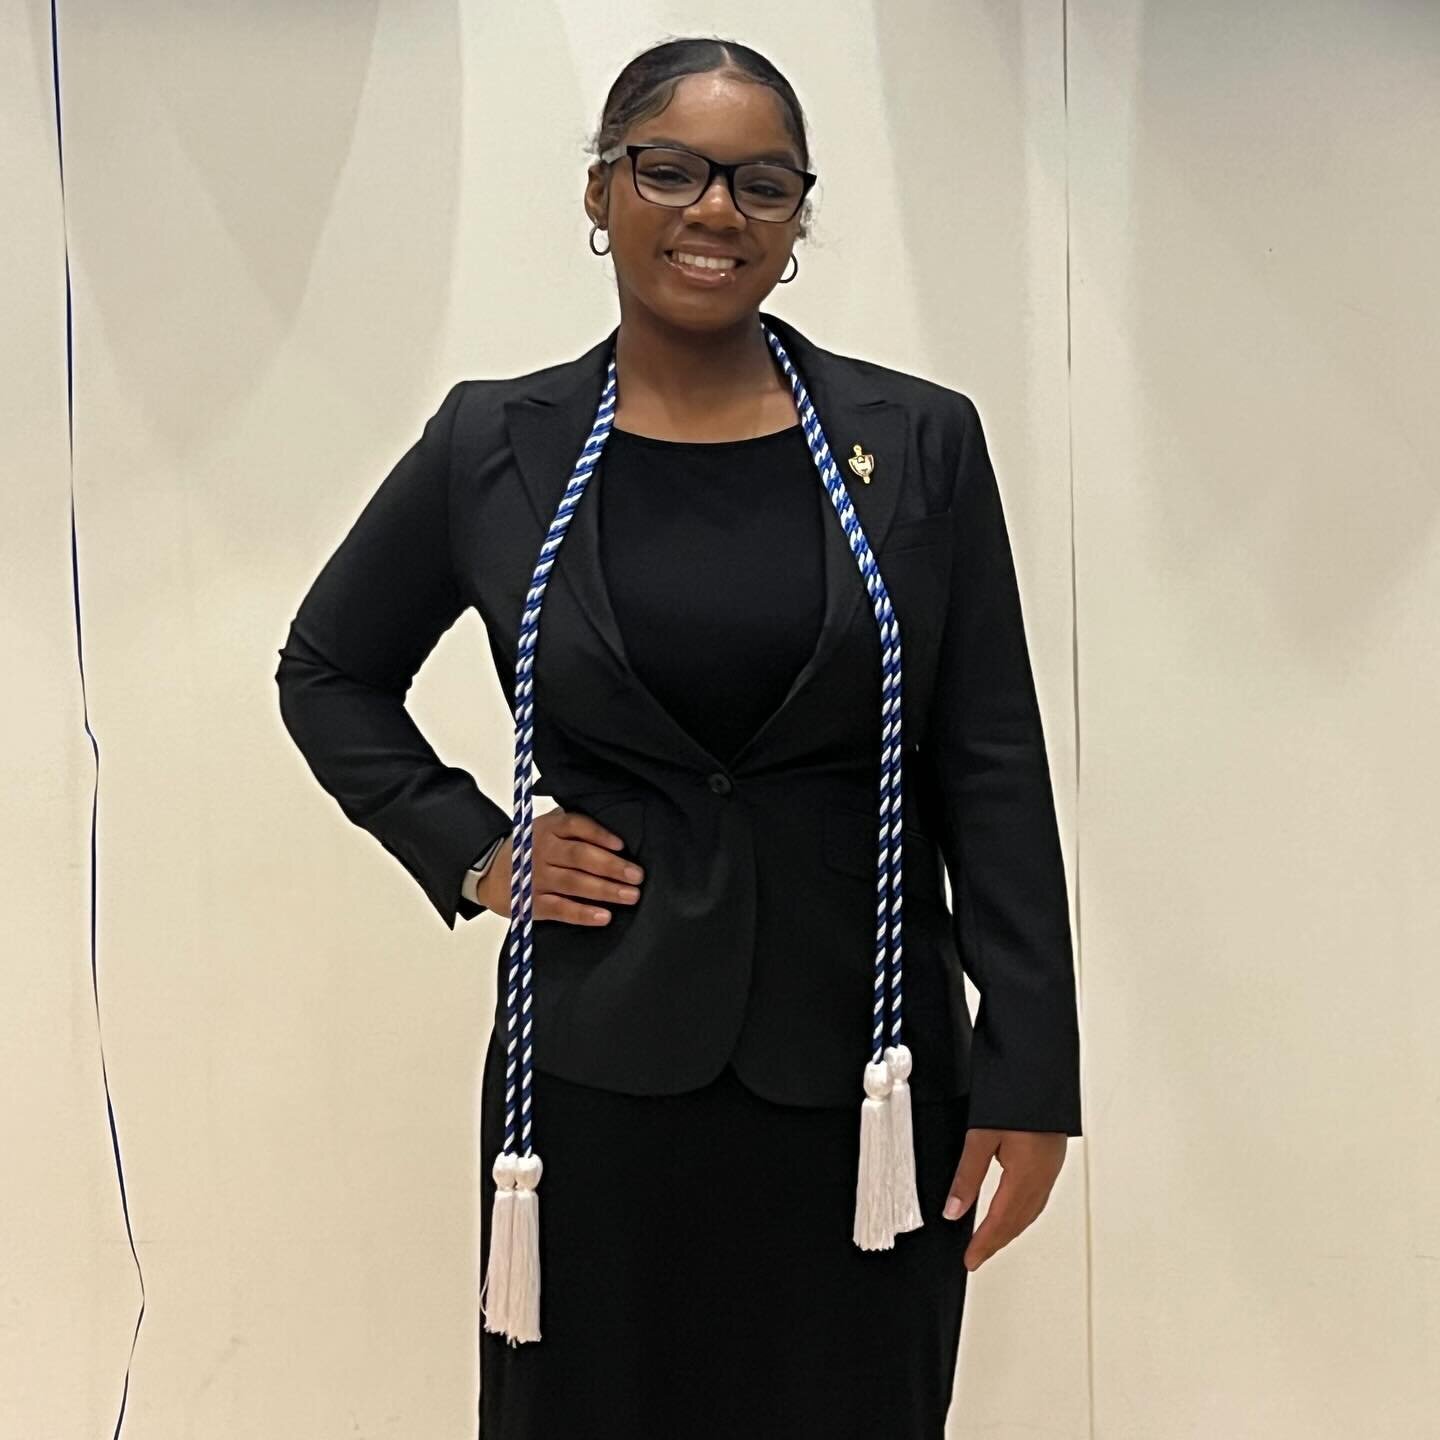 We would like to formally Congratulate our IU College Ambassadors Neveah Smith on being inducted into Chi Alpha Epsilon Honors Society. 

Chi Alpha Epsilon was formed to recognize the academic achievements of students admitted to colleges and the uni